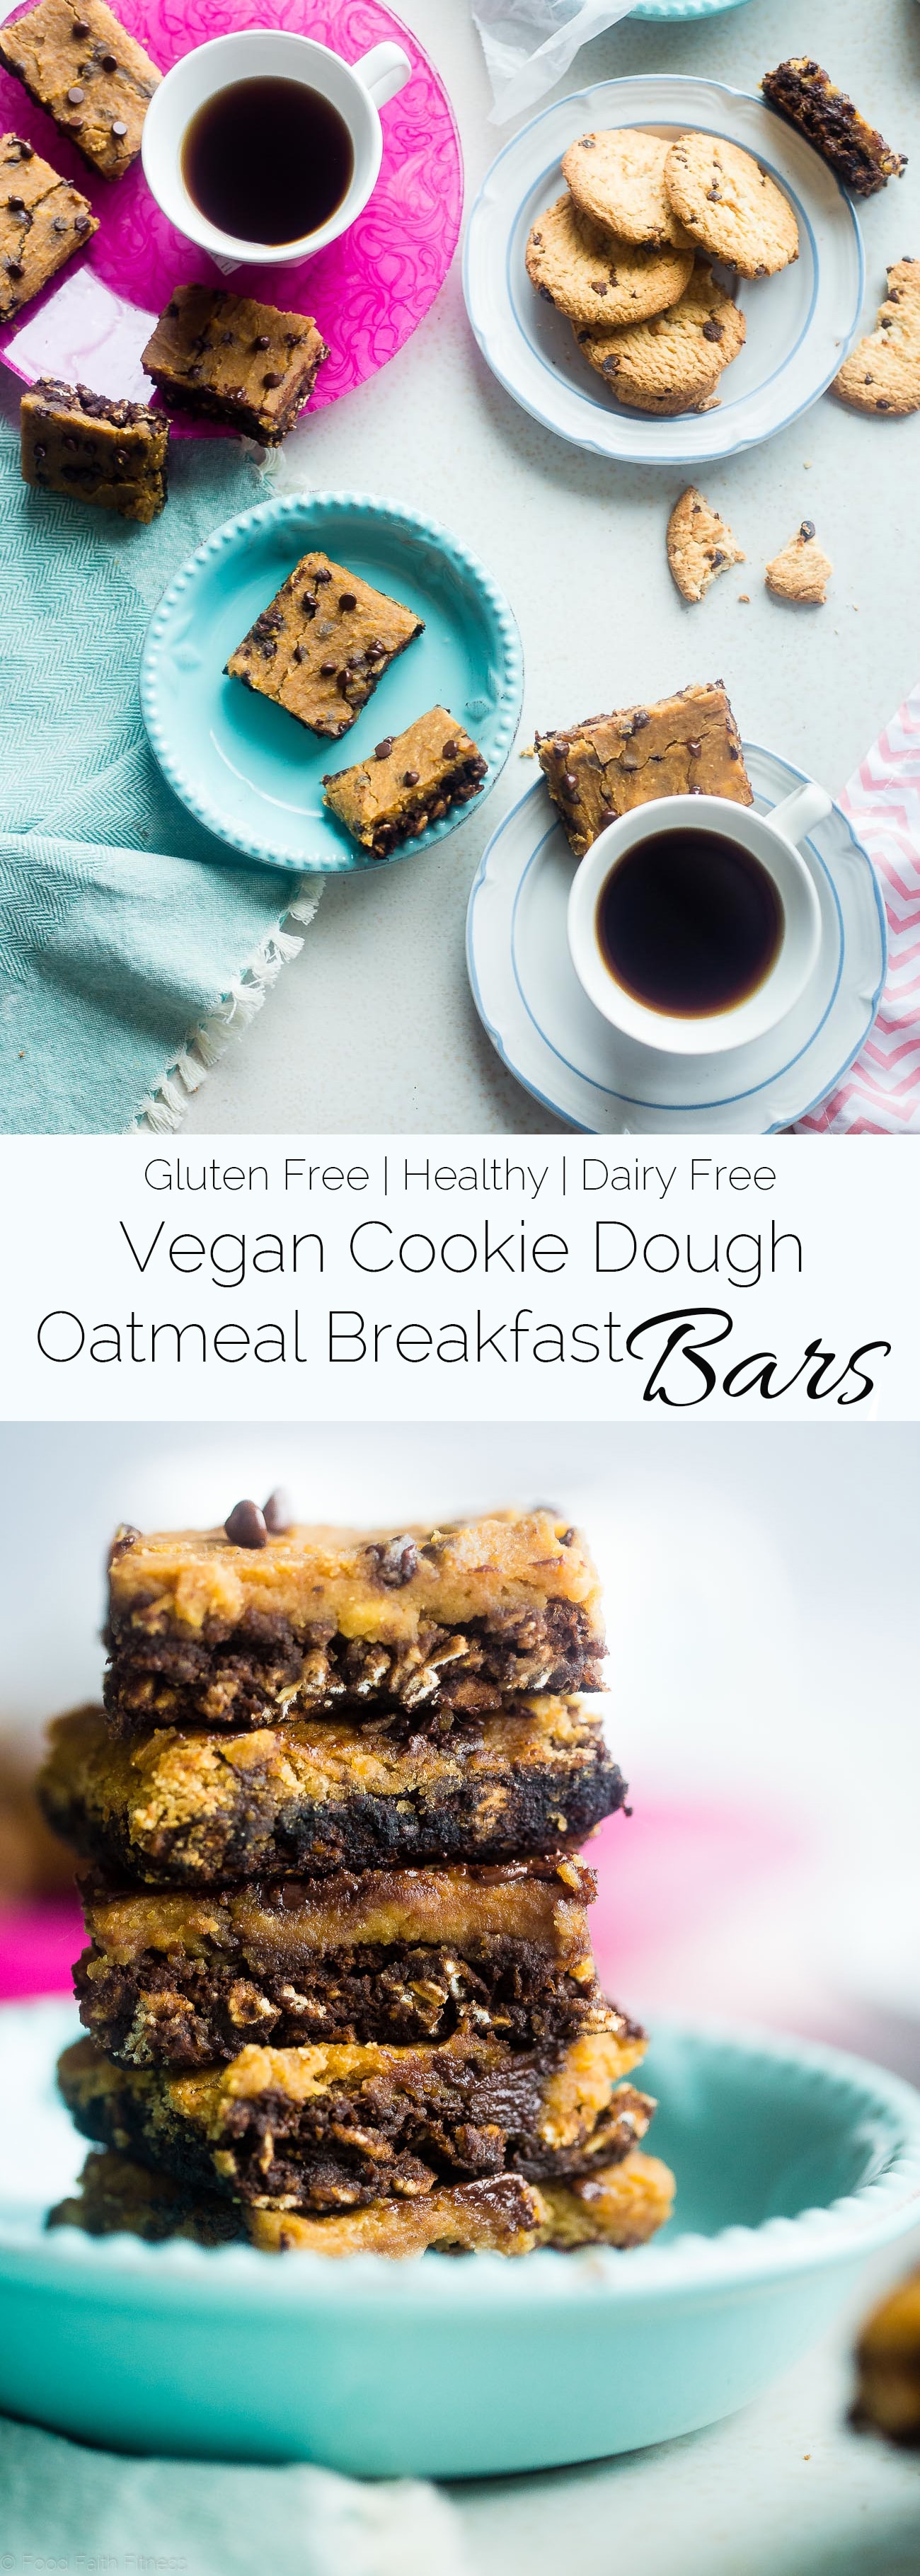 These Vegan Cookie Dough Oatmeal Breakfast Bars are perfect for an healthy grab and go breakfast. Plus they taste like cookie dough! Packed with real food plant based protein, chocolate chips, and gluten free oats. A healthy breakfast that tastes like dessert! YUM! www.cottercrunch.